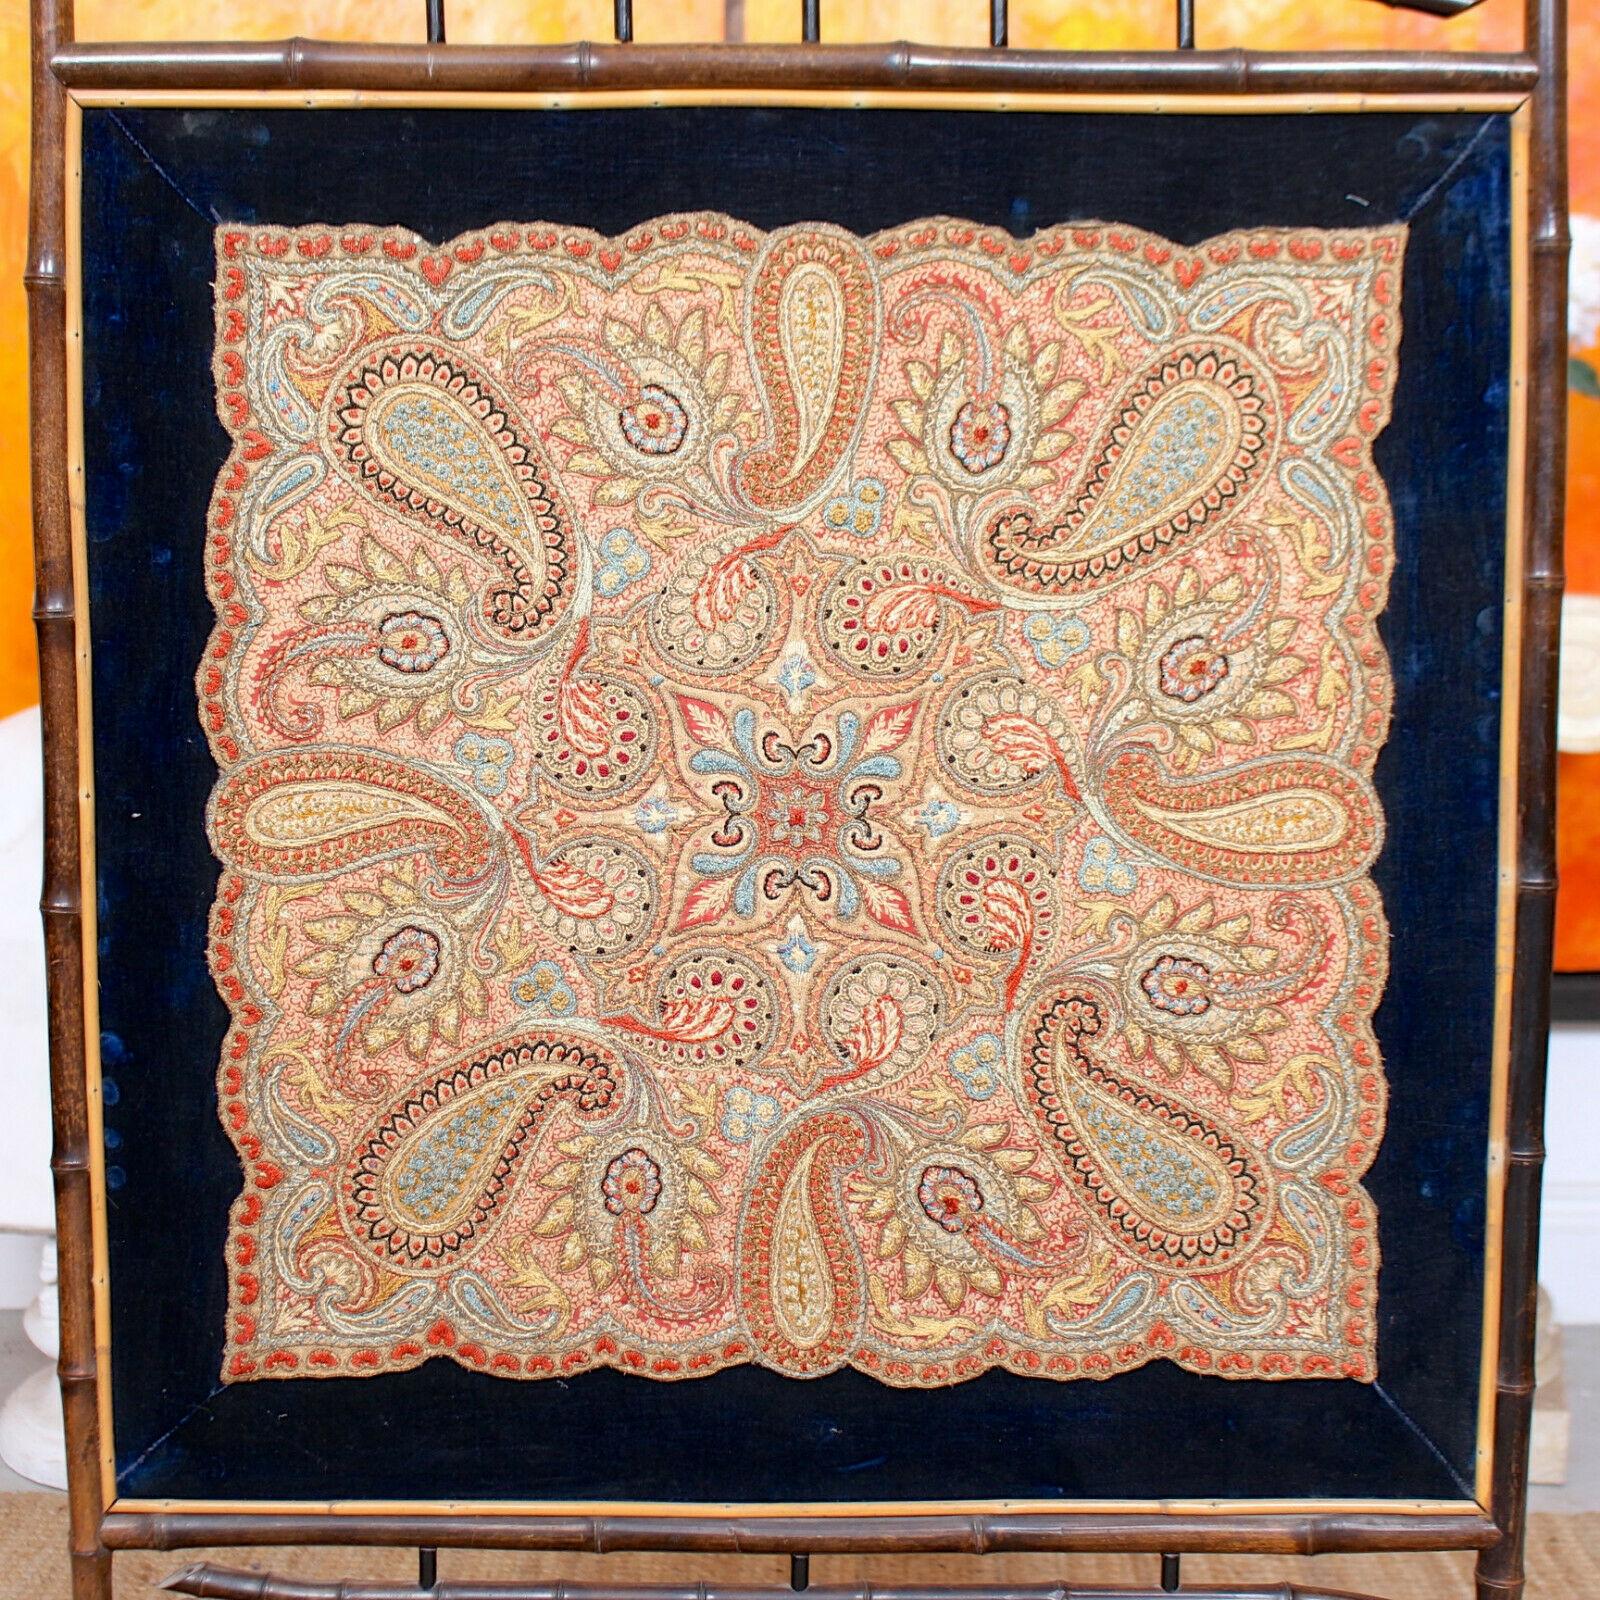 An attractive late 19th century Aesthetic movement fire screen in the Japanese taste, fitted an ornate needlework panel encased within a bamboo frame.

England, circa 1880.